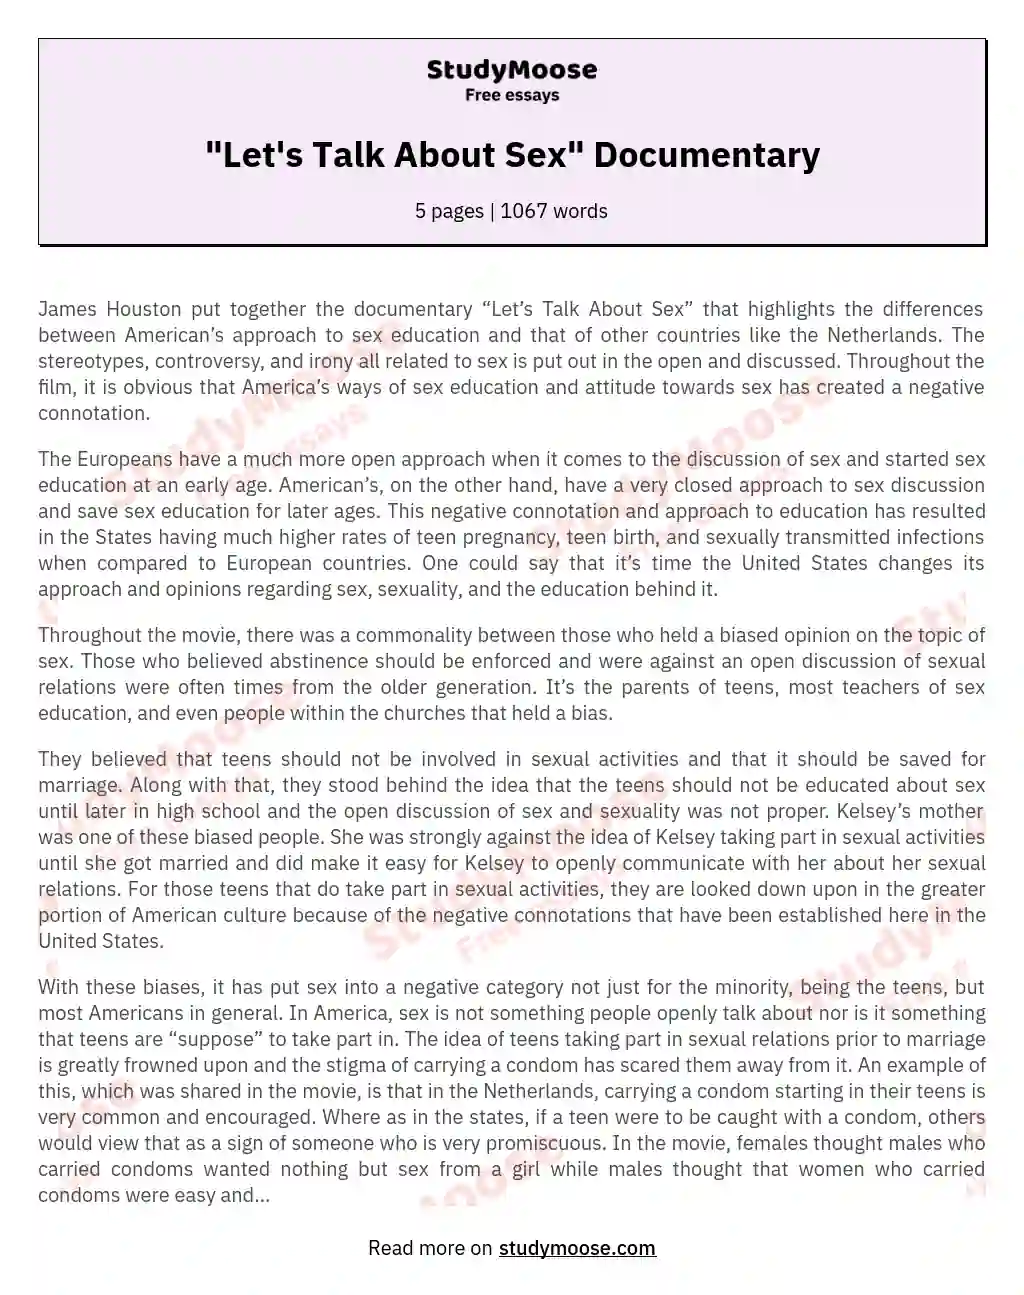 "Let's Talk About Sex" Documentary essay